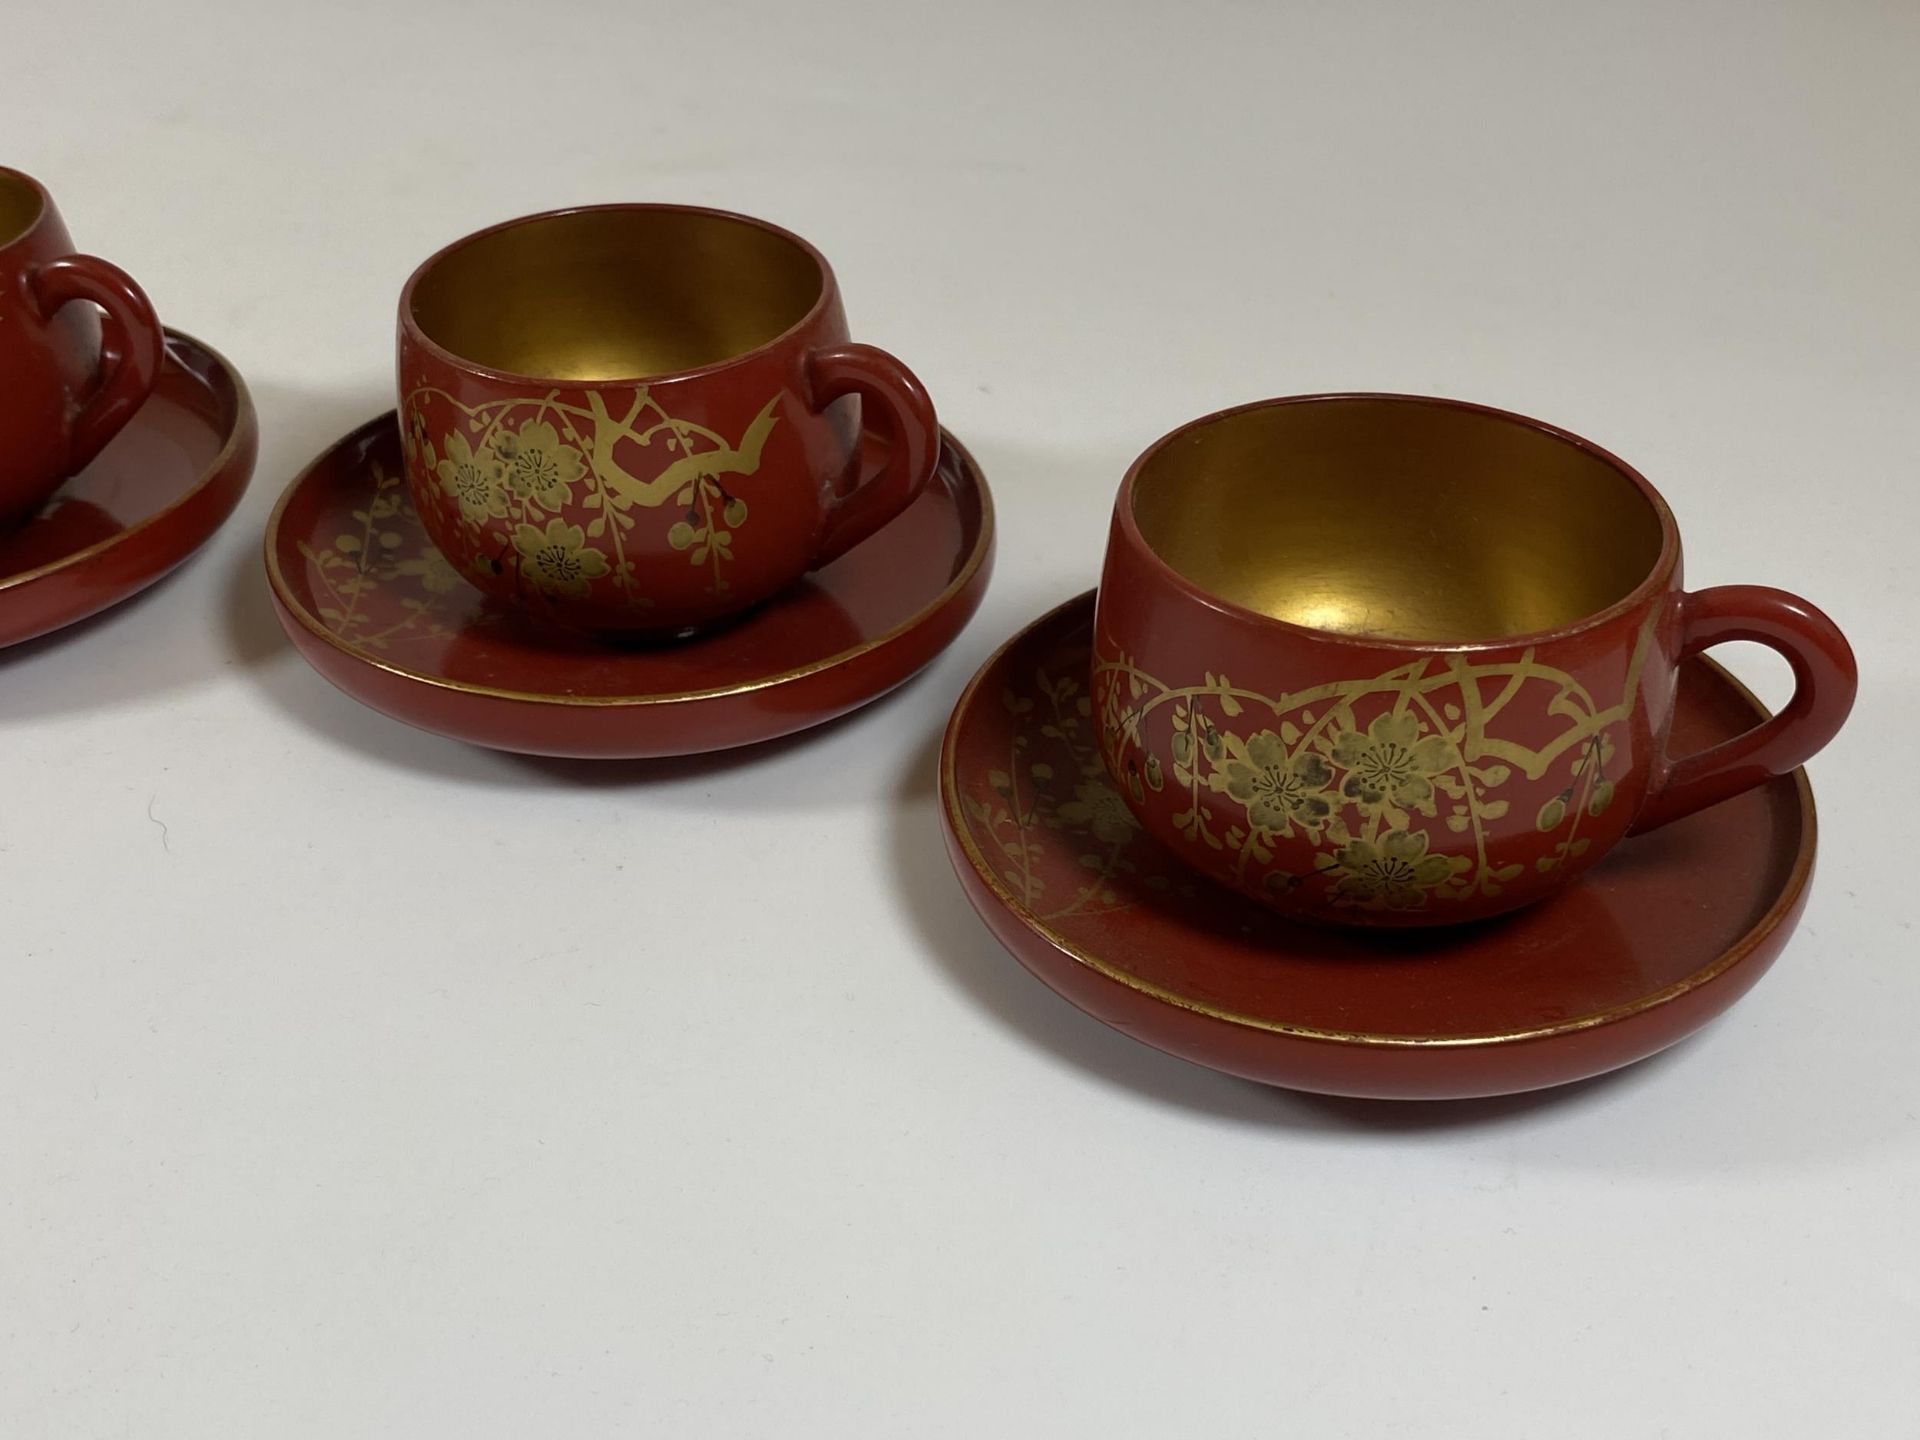 A SET OF FOUR ORIENTAL RED AND GILT LACQUERED CUPS AND SAUCERS, SAUCER DIAMETER 9.5CM - Image 3 of 6